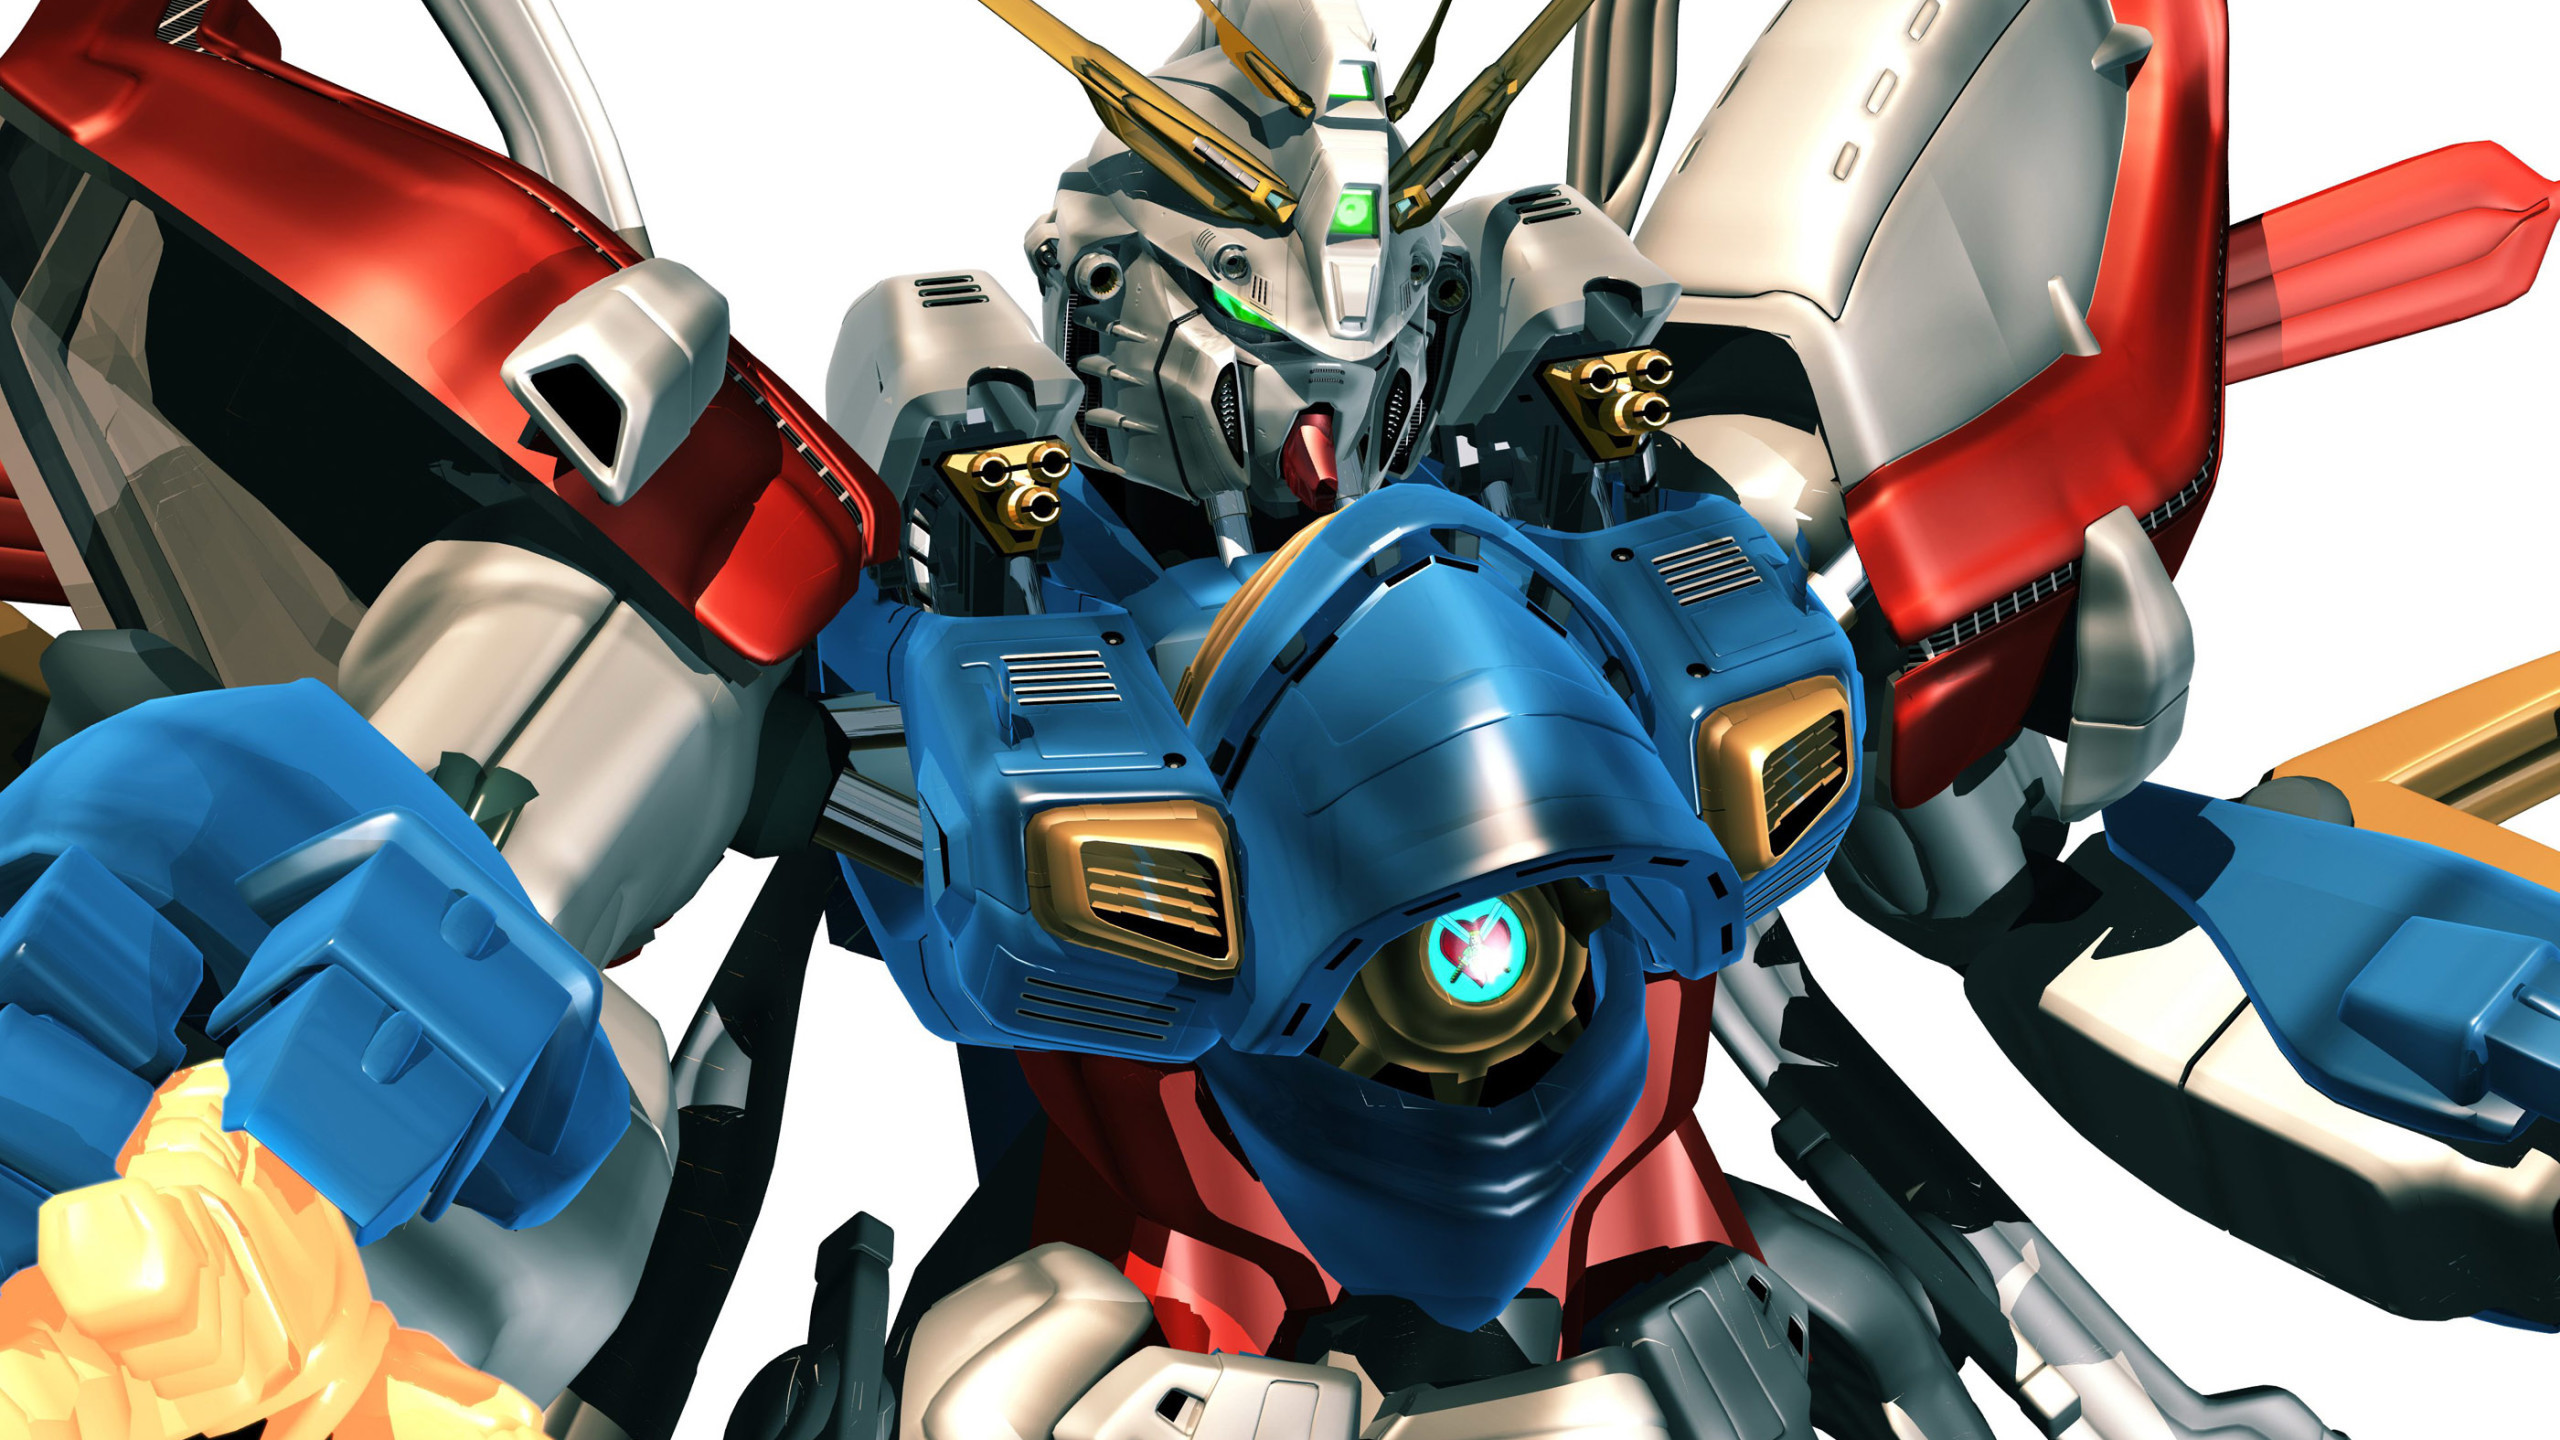 2560x1440 The God Gundam (Burning Gundam in the English dub) is a mobile suit  featured in Mobile Fighter G Gundam. It was the second Mobile Fighter used  by Neo Japan ...